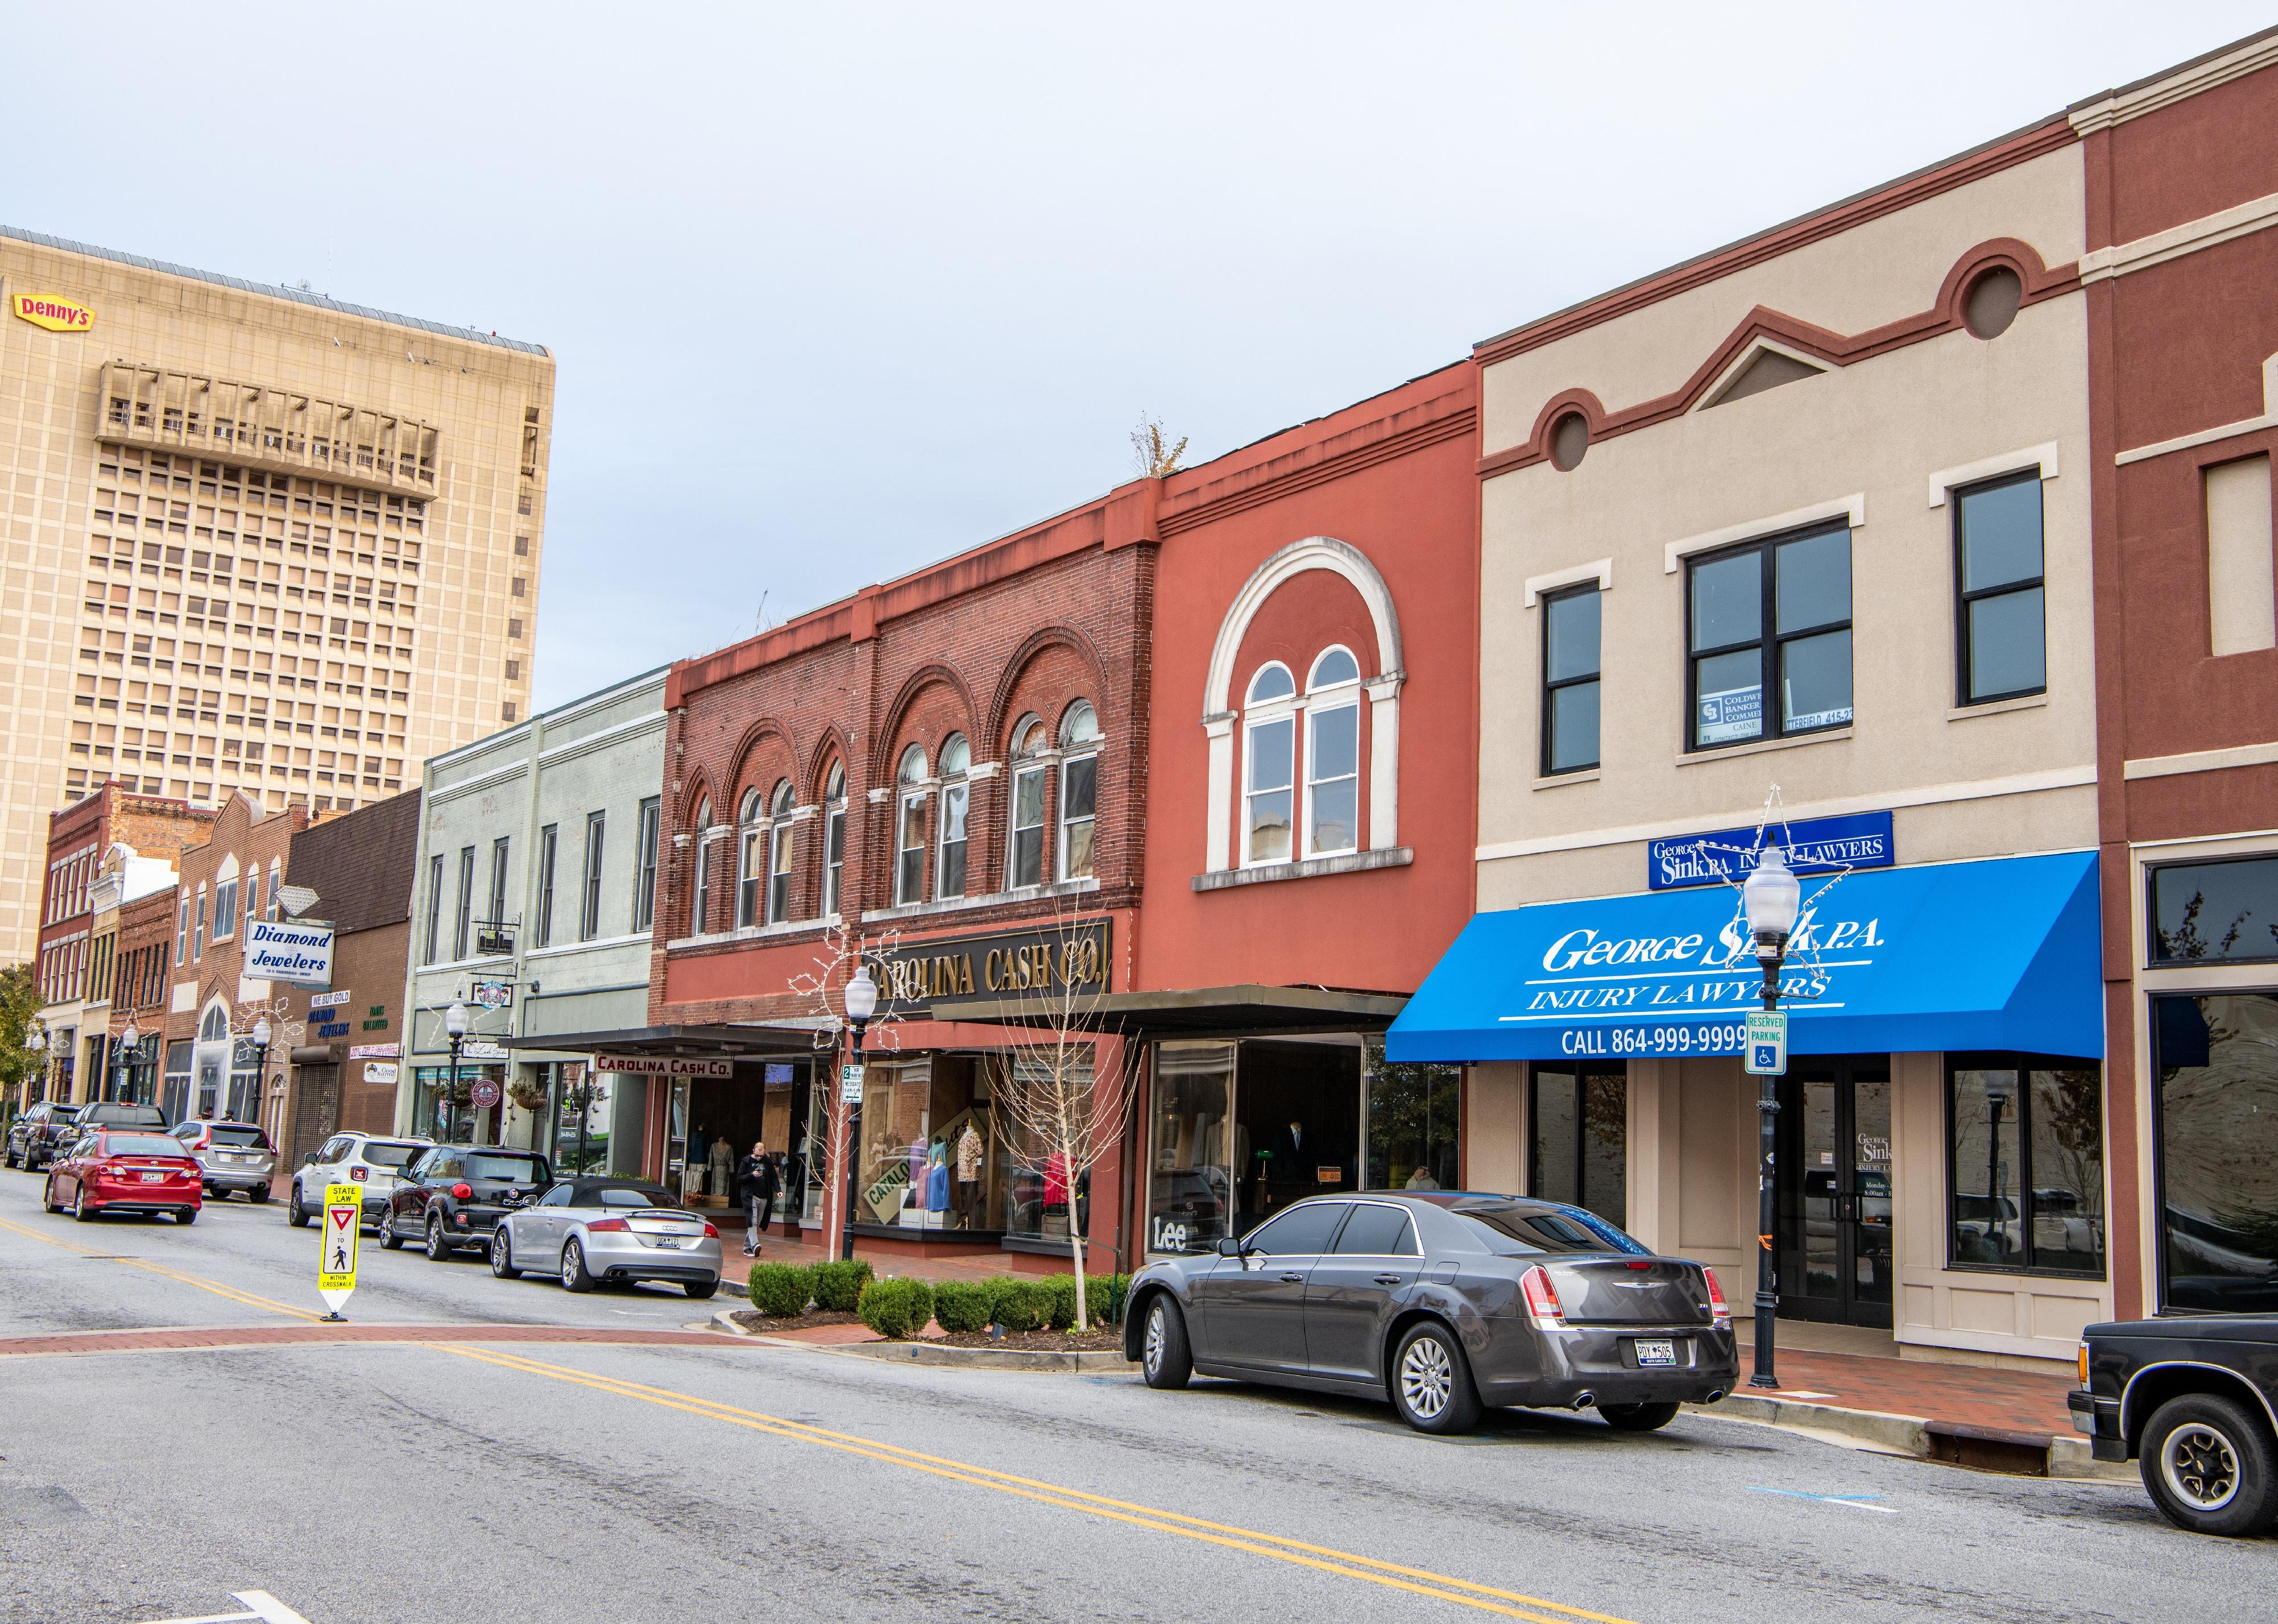 Historic traditional architecture on Main Street, downtown Spartanburg.